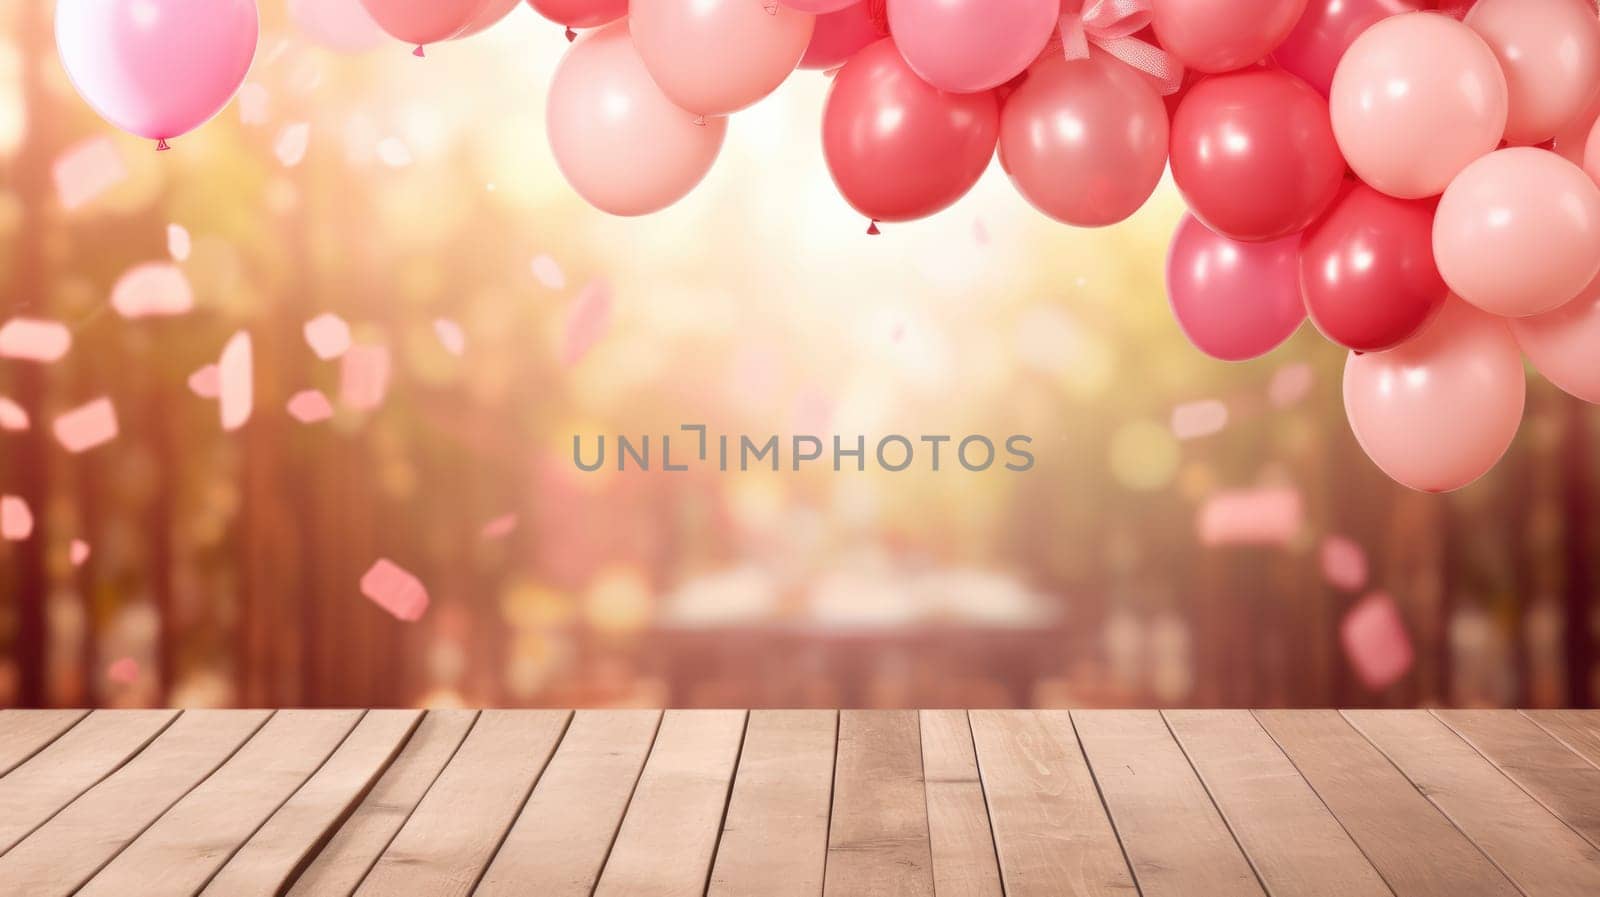 Empty wooden table in the foreground. Blurred background with pink balloons by natali_brill